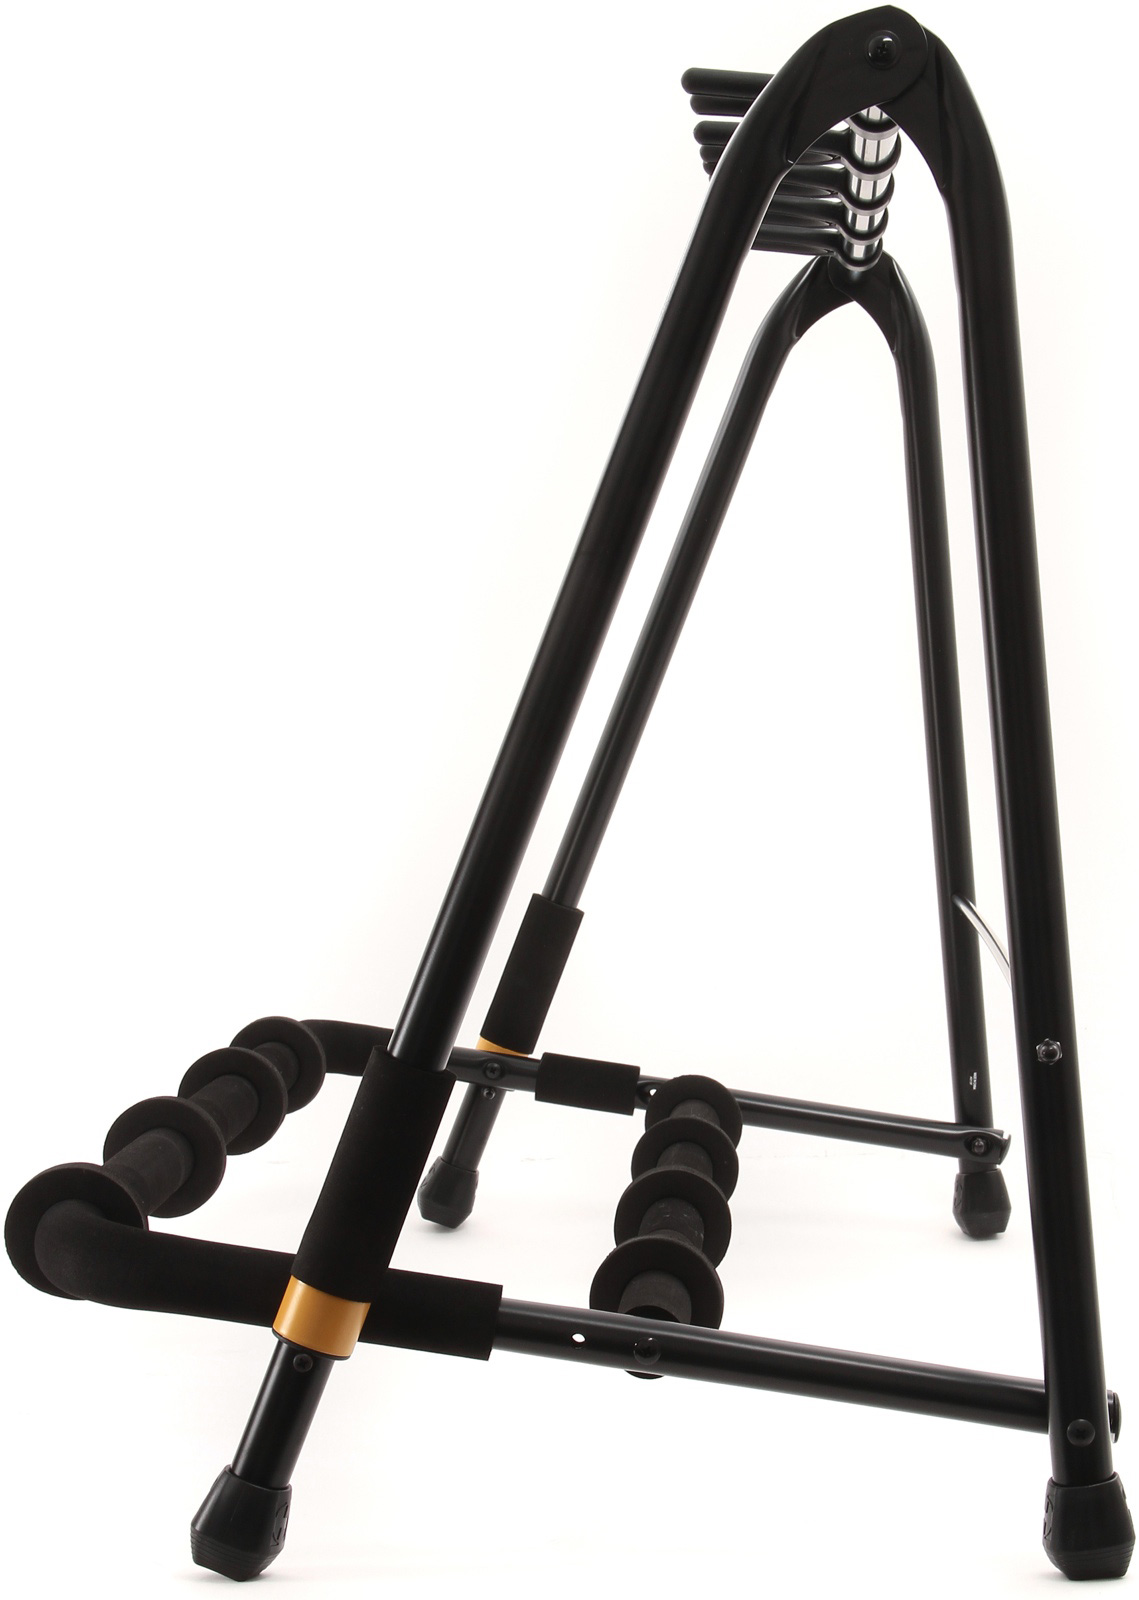 Hercules Stand Gs525b Floor Rack 5-guitars Stand - Stand for guitar & bass - Variation 2